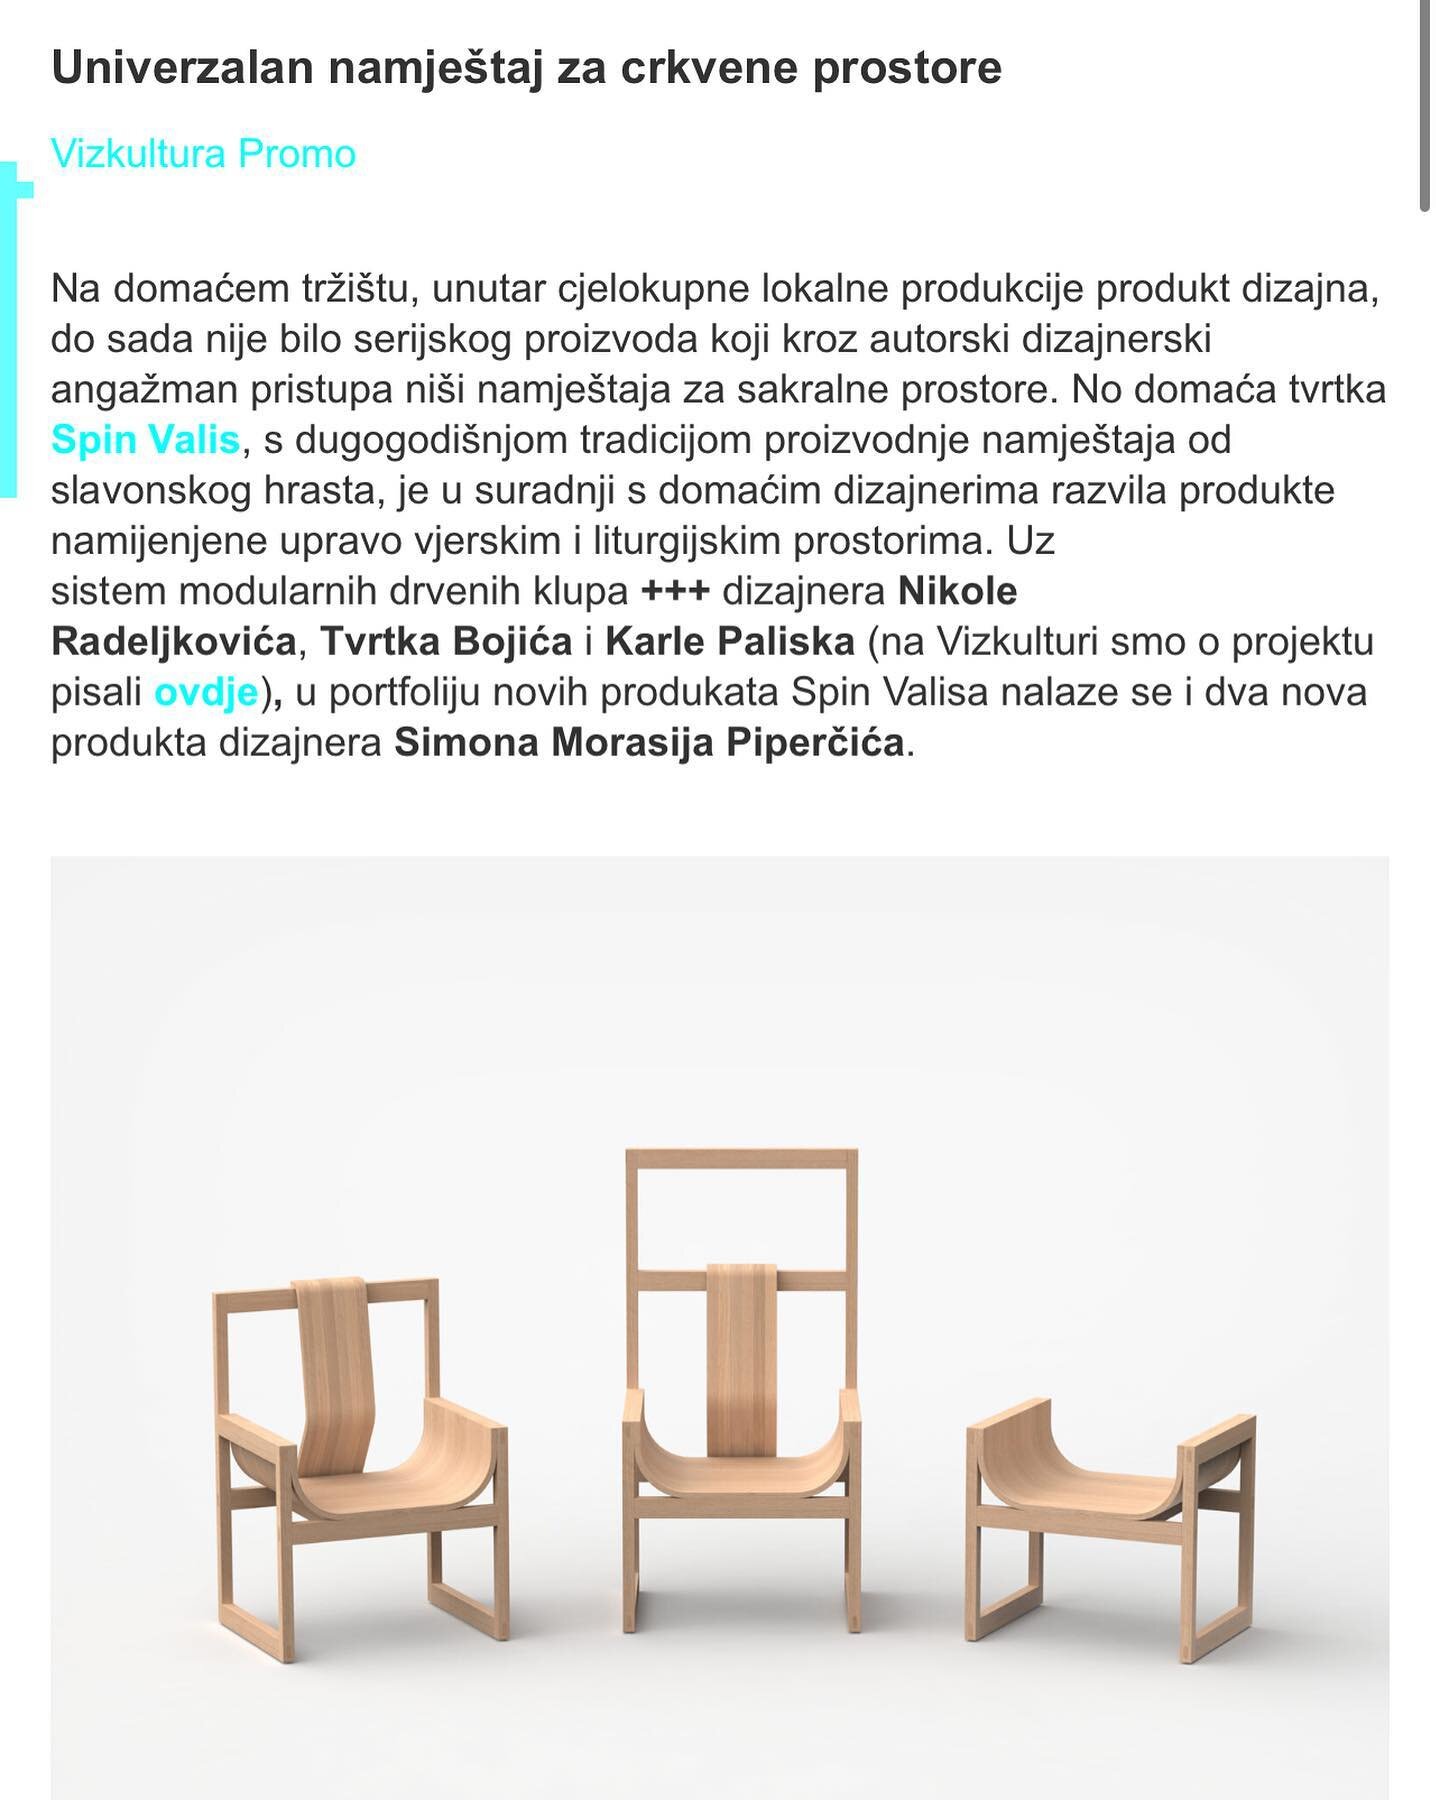 Our upcoming project got featured in @vizkultura magazine. Introducing serially produced furniture for sacred spaces, including solid oak seating benches and altar chairs. Designed with a blend of functionality and comfort, we've combined CNC milling